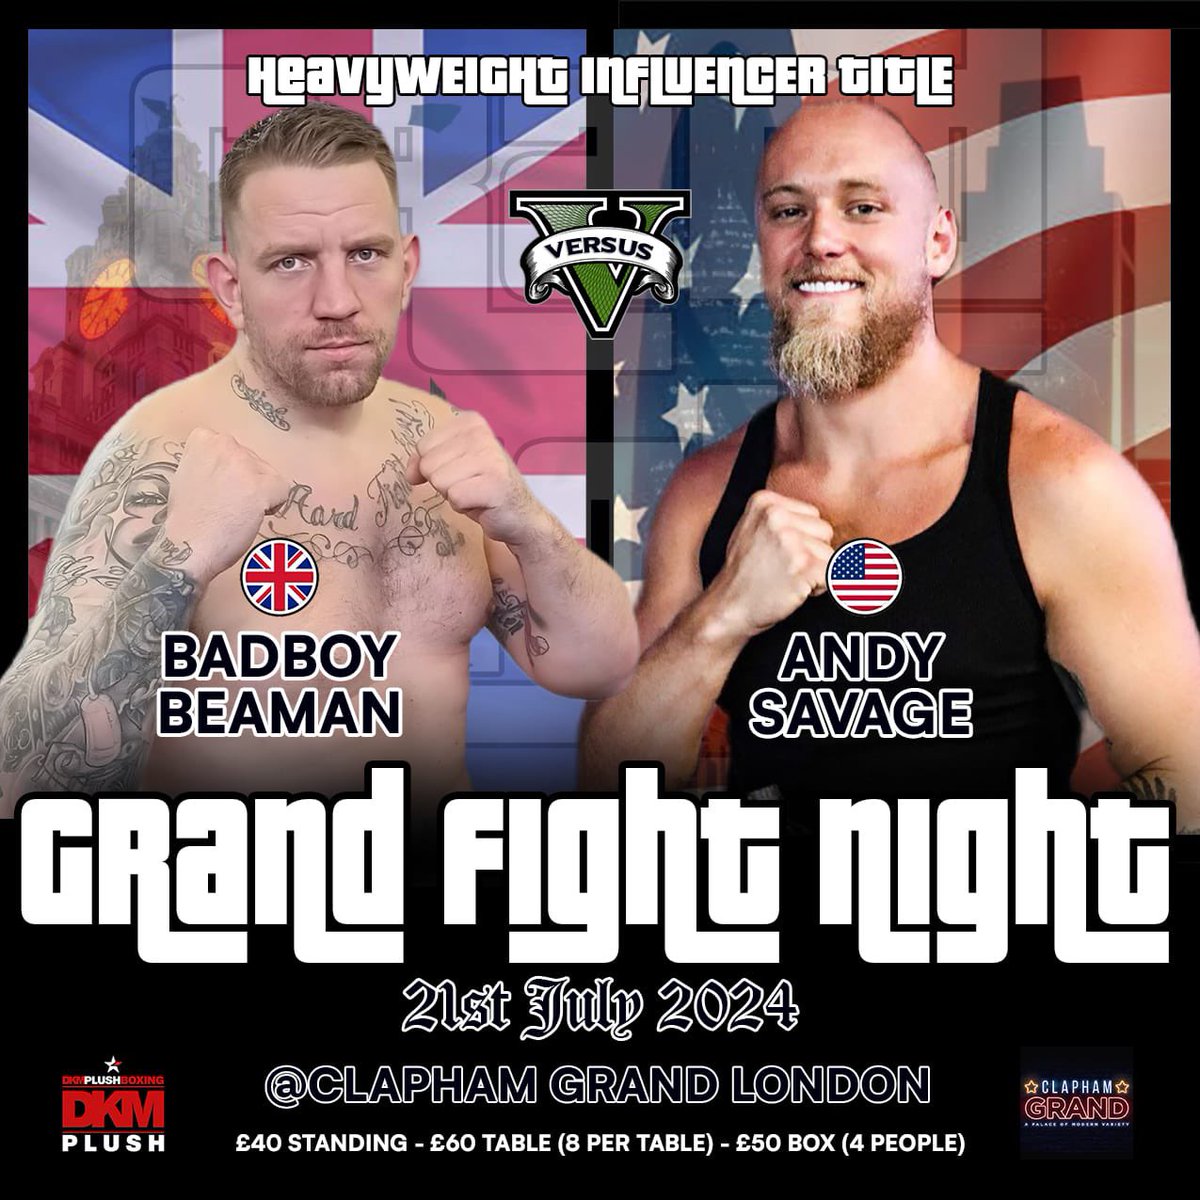 BATTLE OF THE BIG GUNS! Two BIG BANGING heavyweights from either side of the pond are now confirmed to battle it out for the Influencer Heavyweight title on July 21st Hailing from the USA, the famous playboy and 1-0 influencer boxer @andregotbars will take on fhe UK’s very own